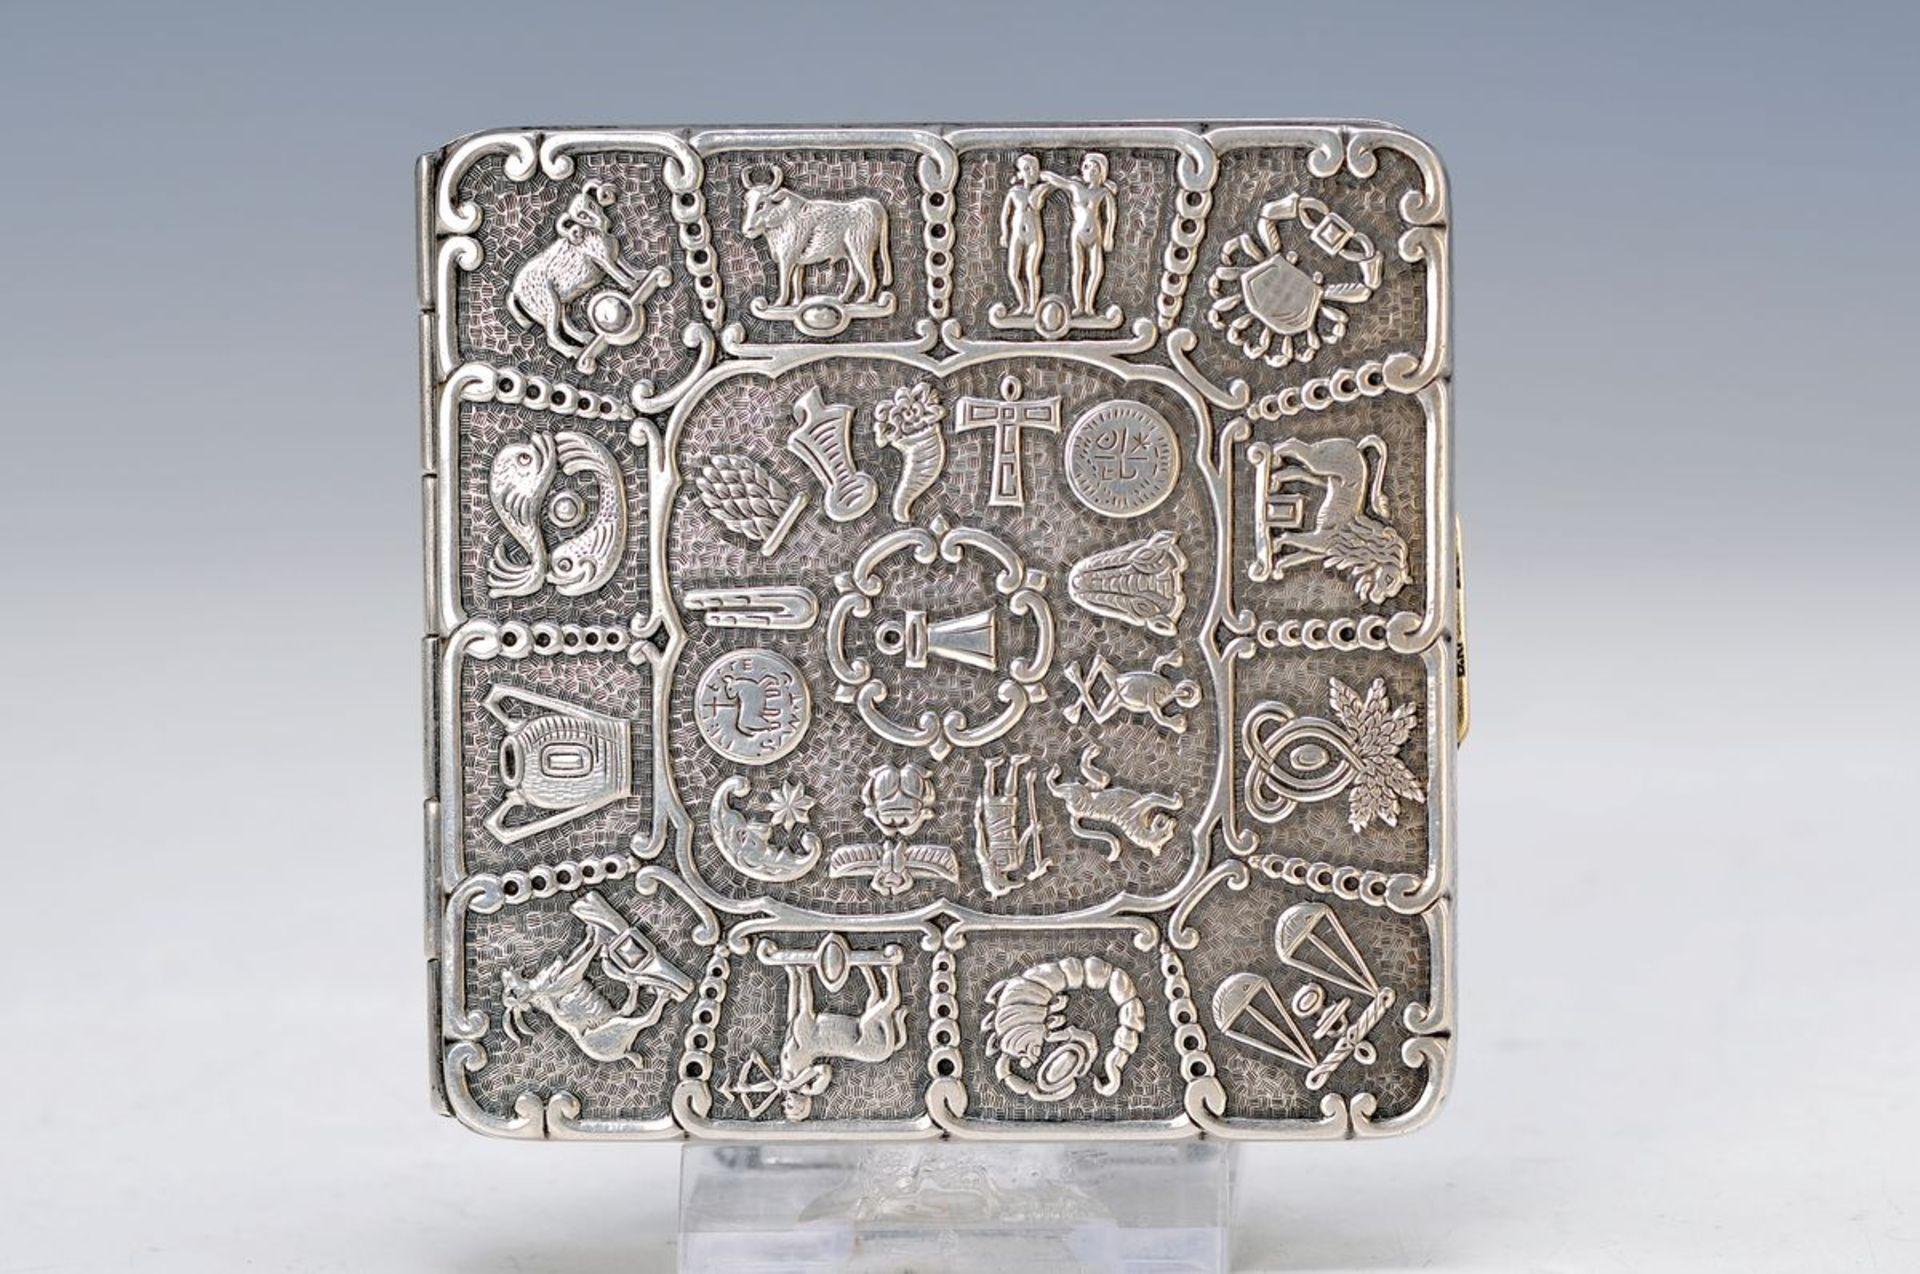 powder box, 1930s, 935er silver, opulent embossed with sign of the zodiac and many other symbols,